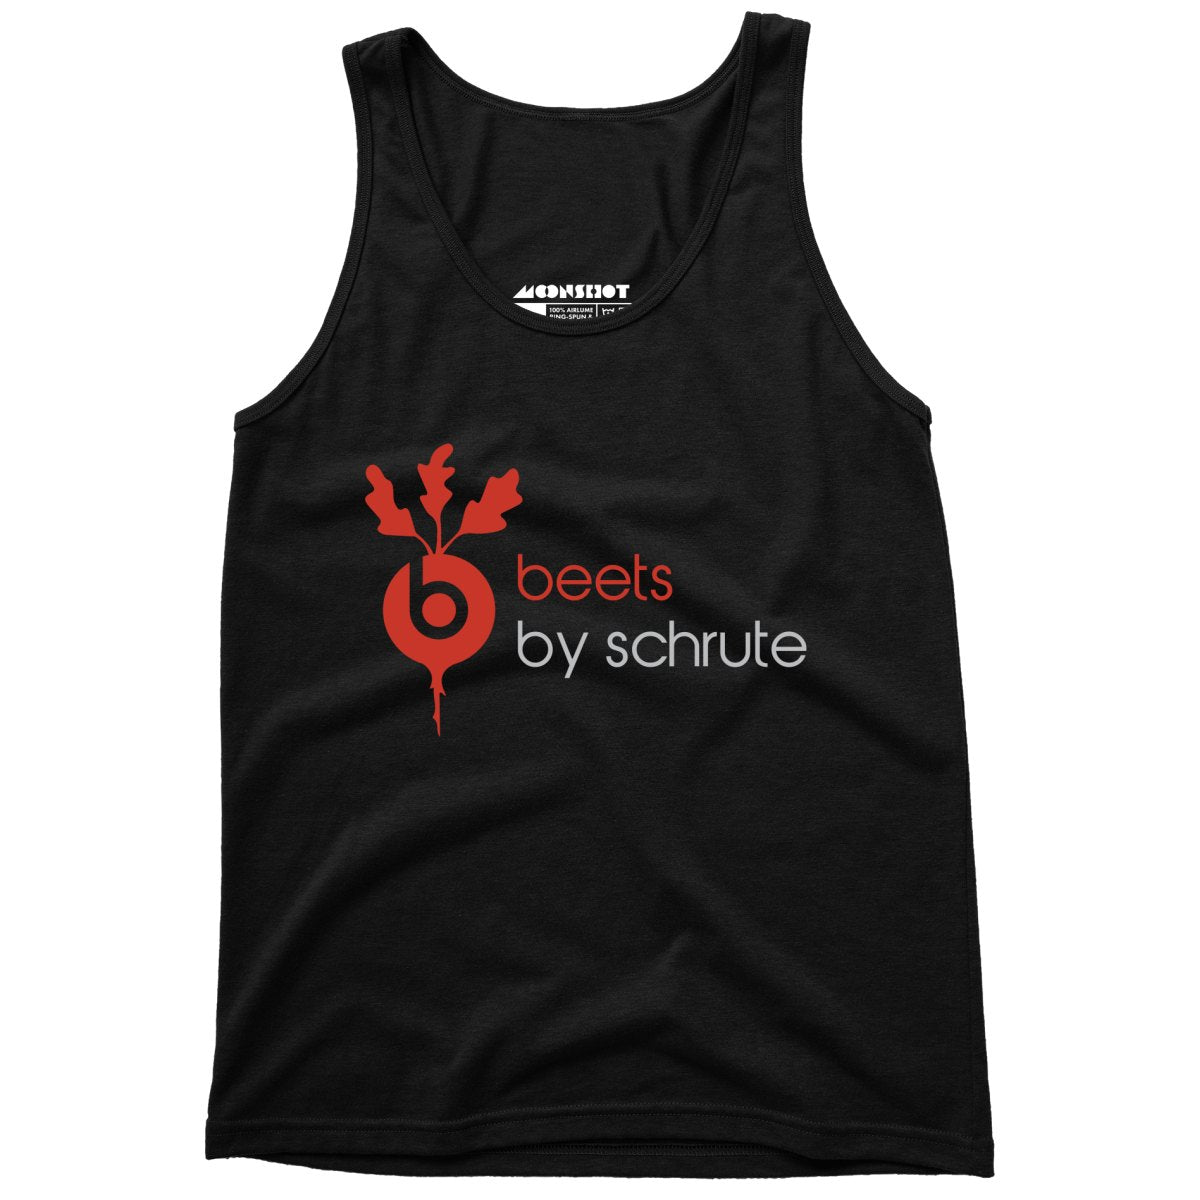 Beets by Schrute - Unisex Tank Top